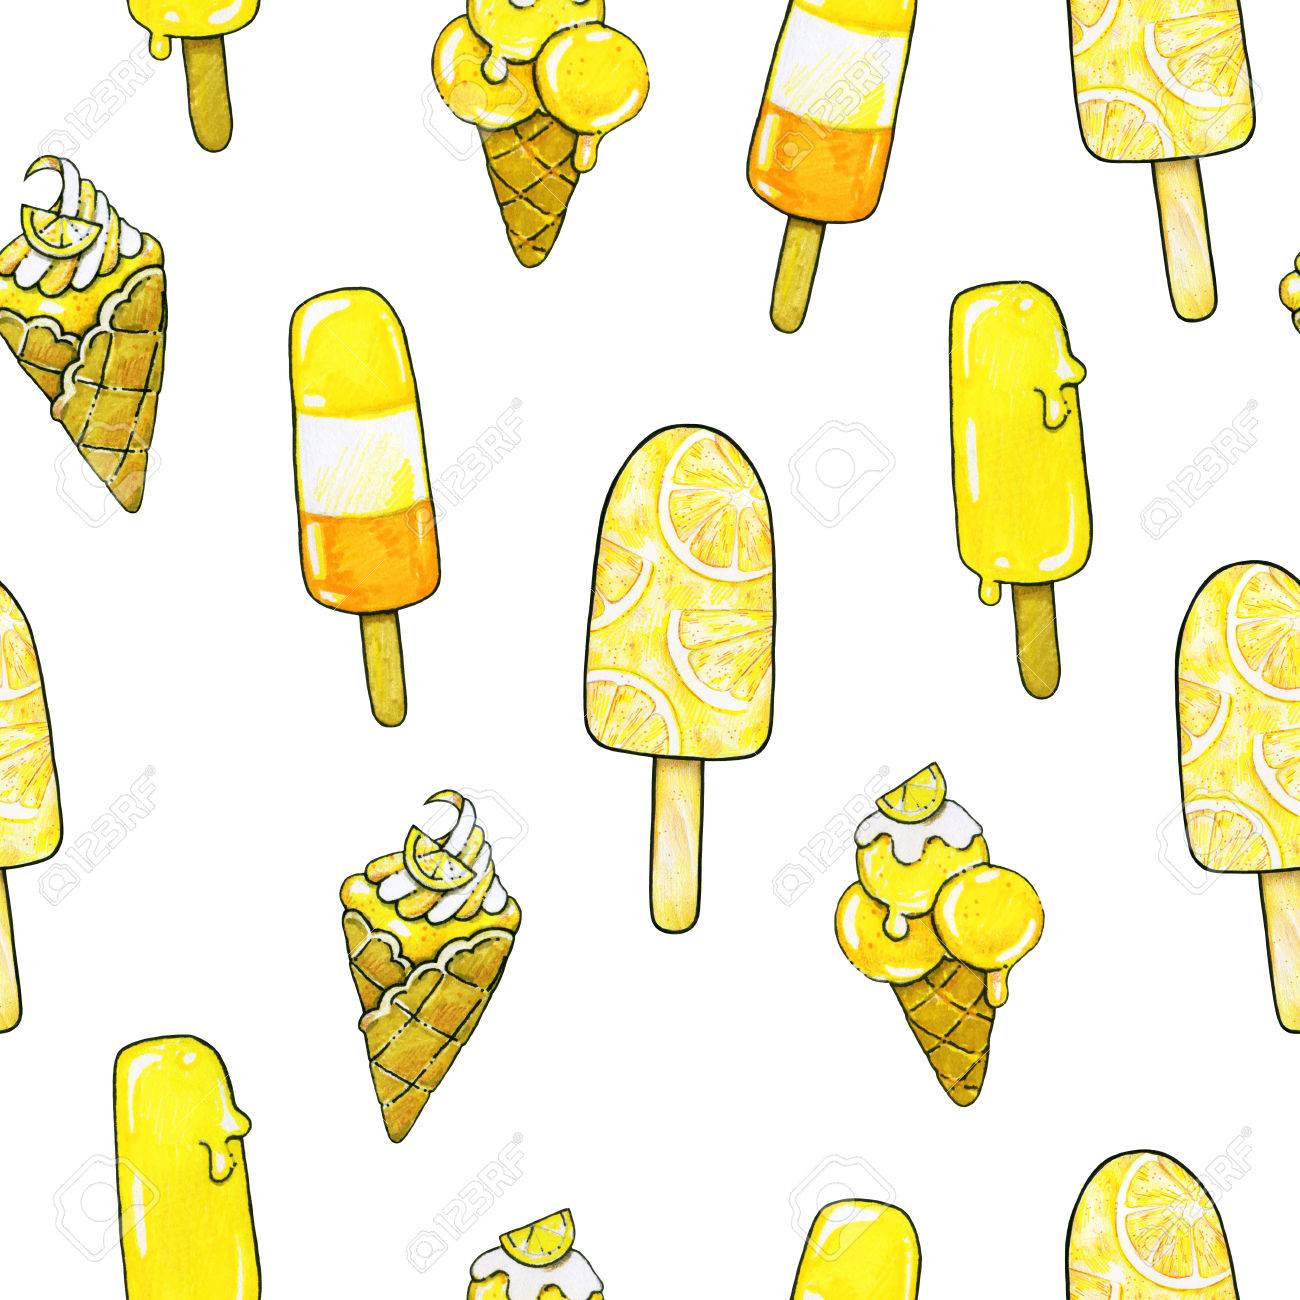 Ice Cream With Taste Of A Lemon Isolated On White Background